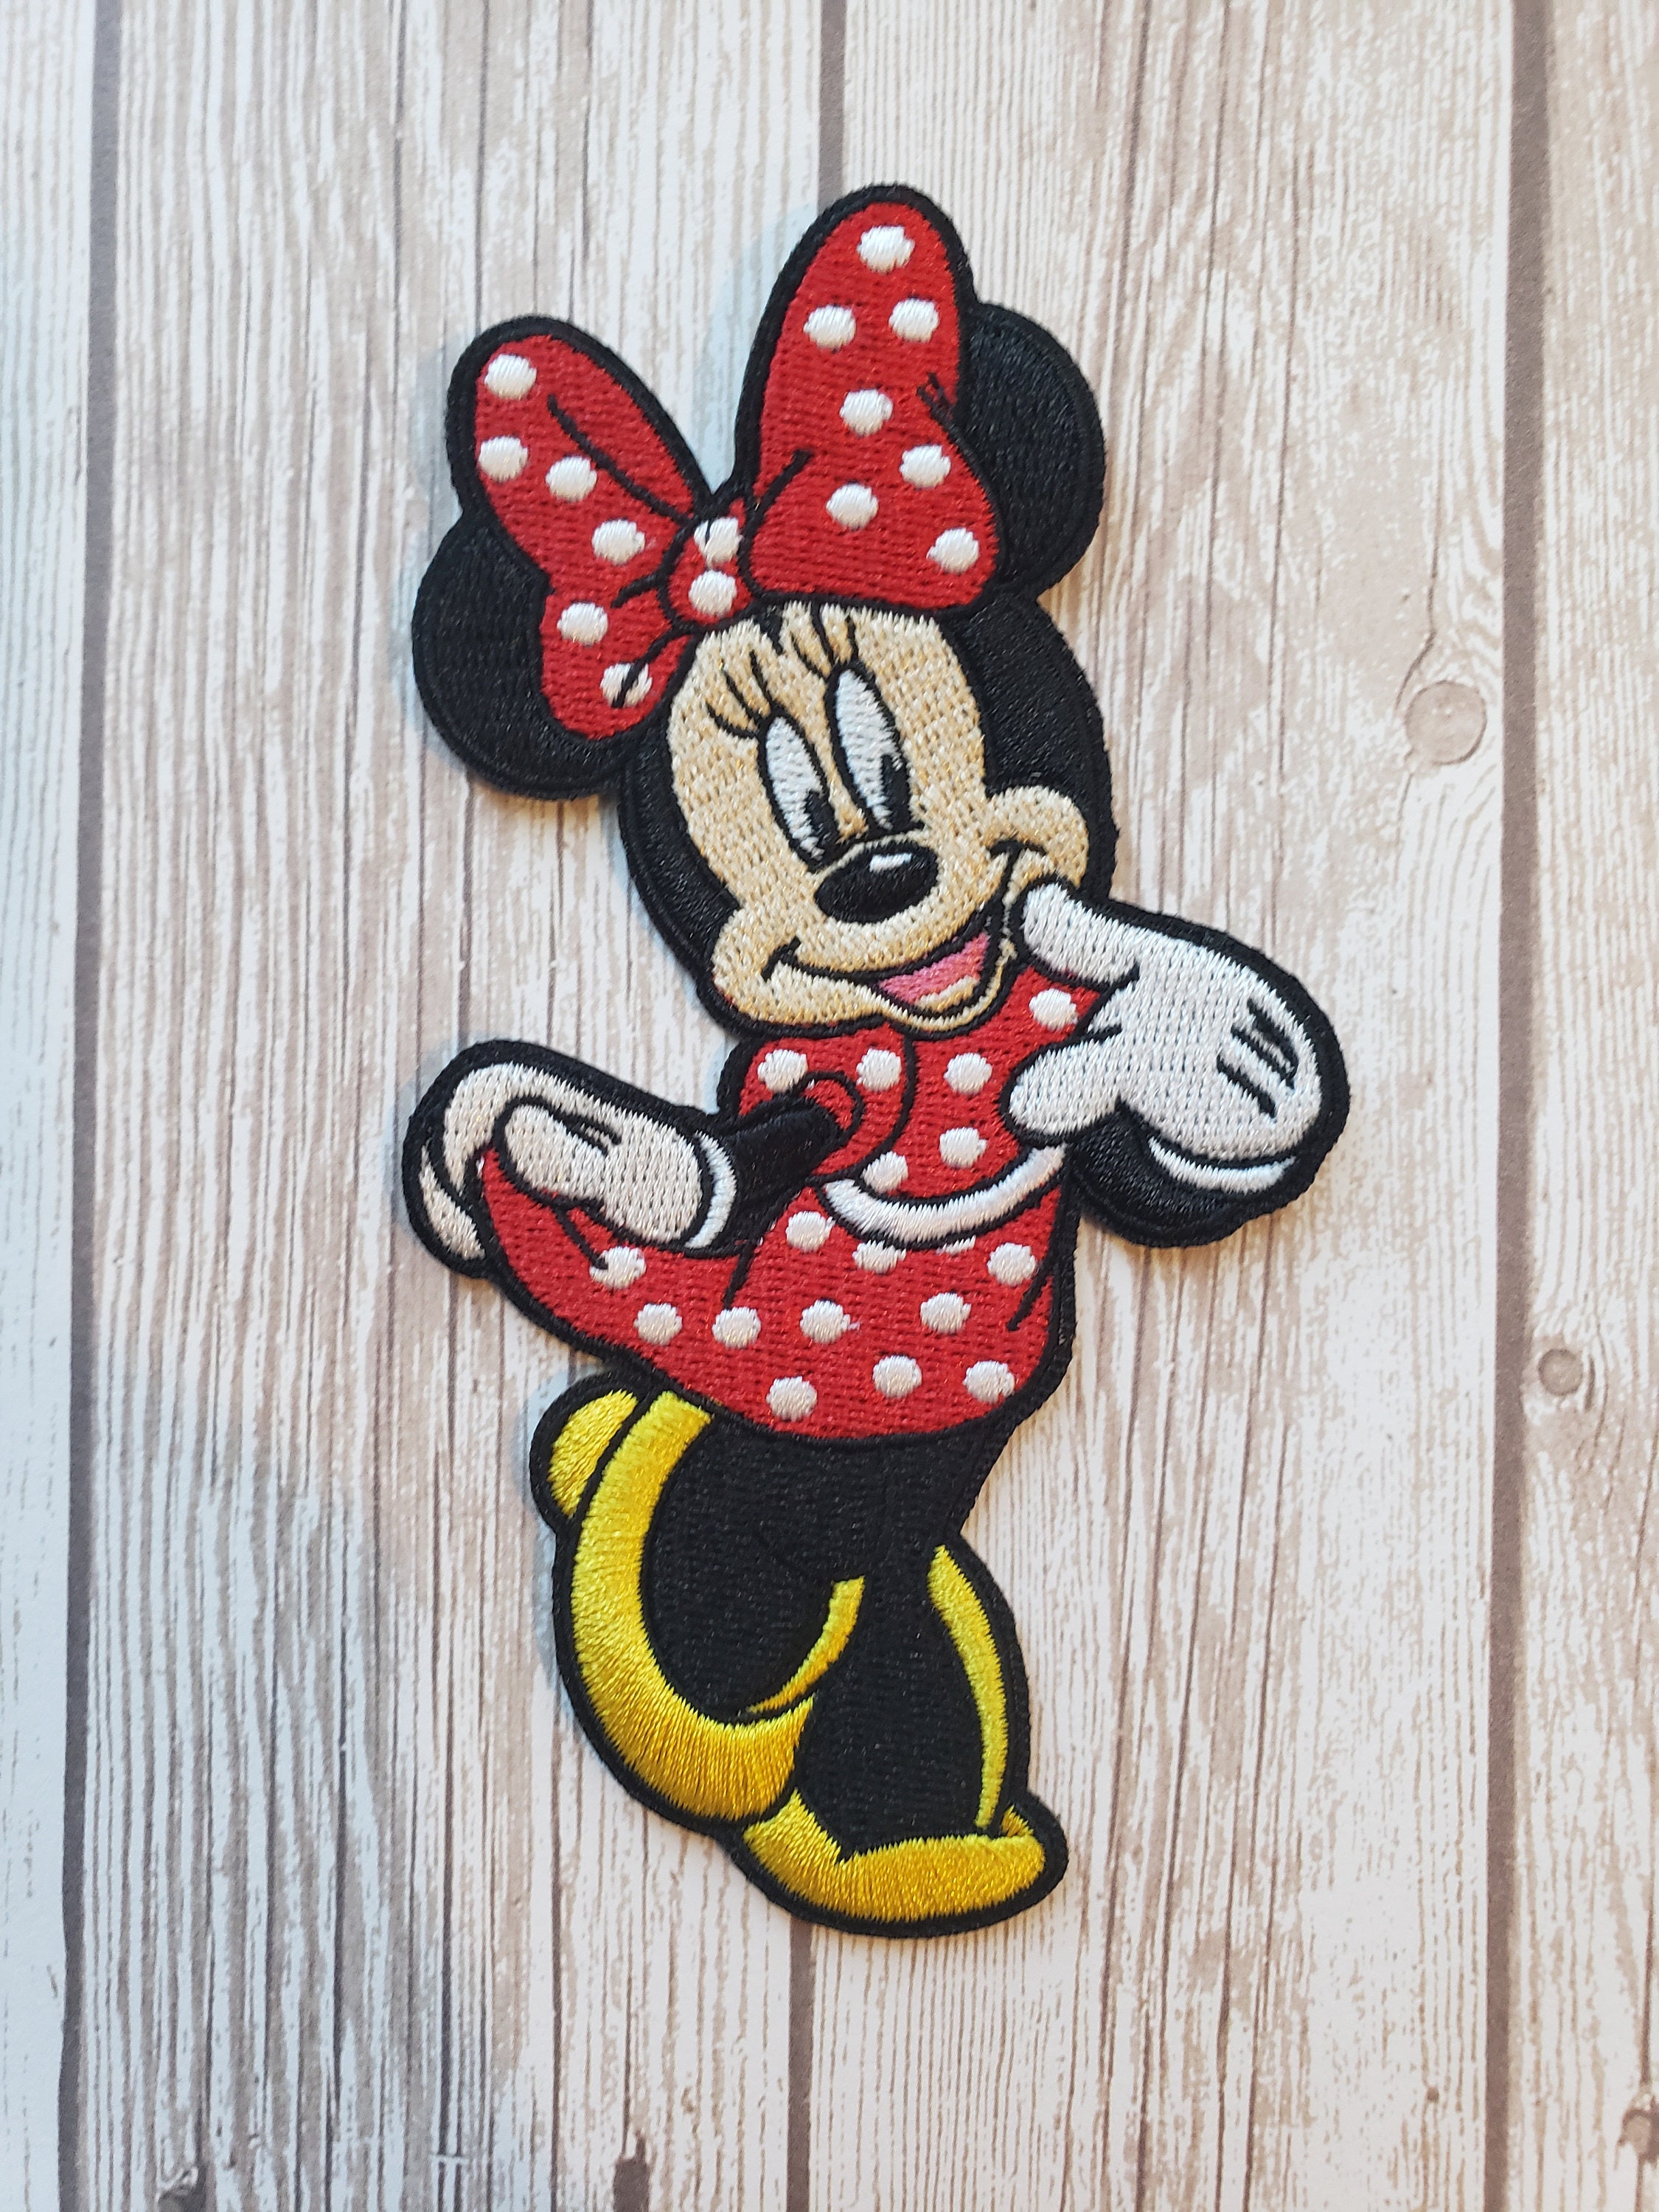 1Pcs ] Large Disney Minnie Mickey Mouse Patches for Clothing